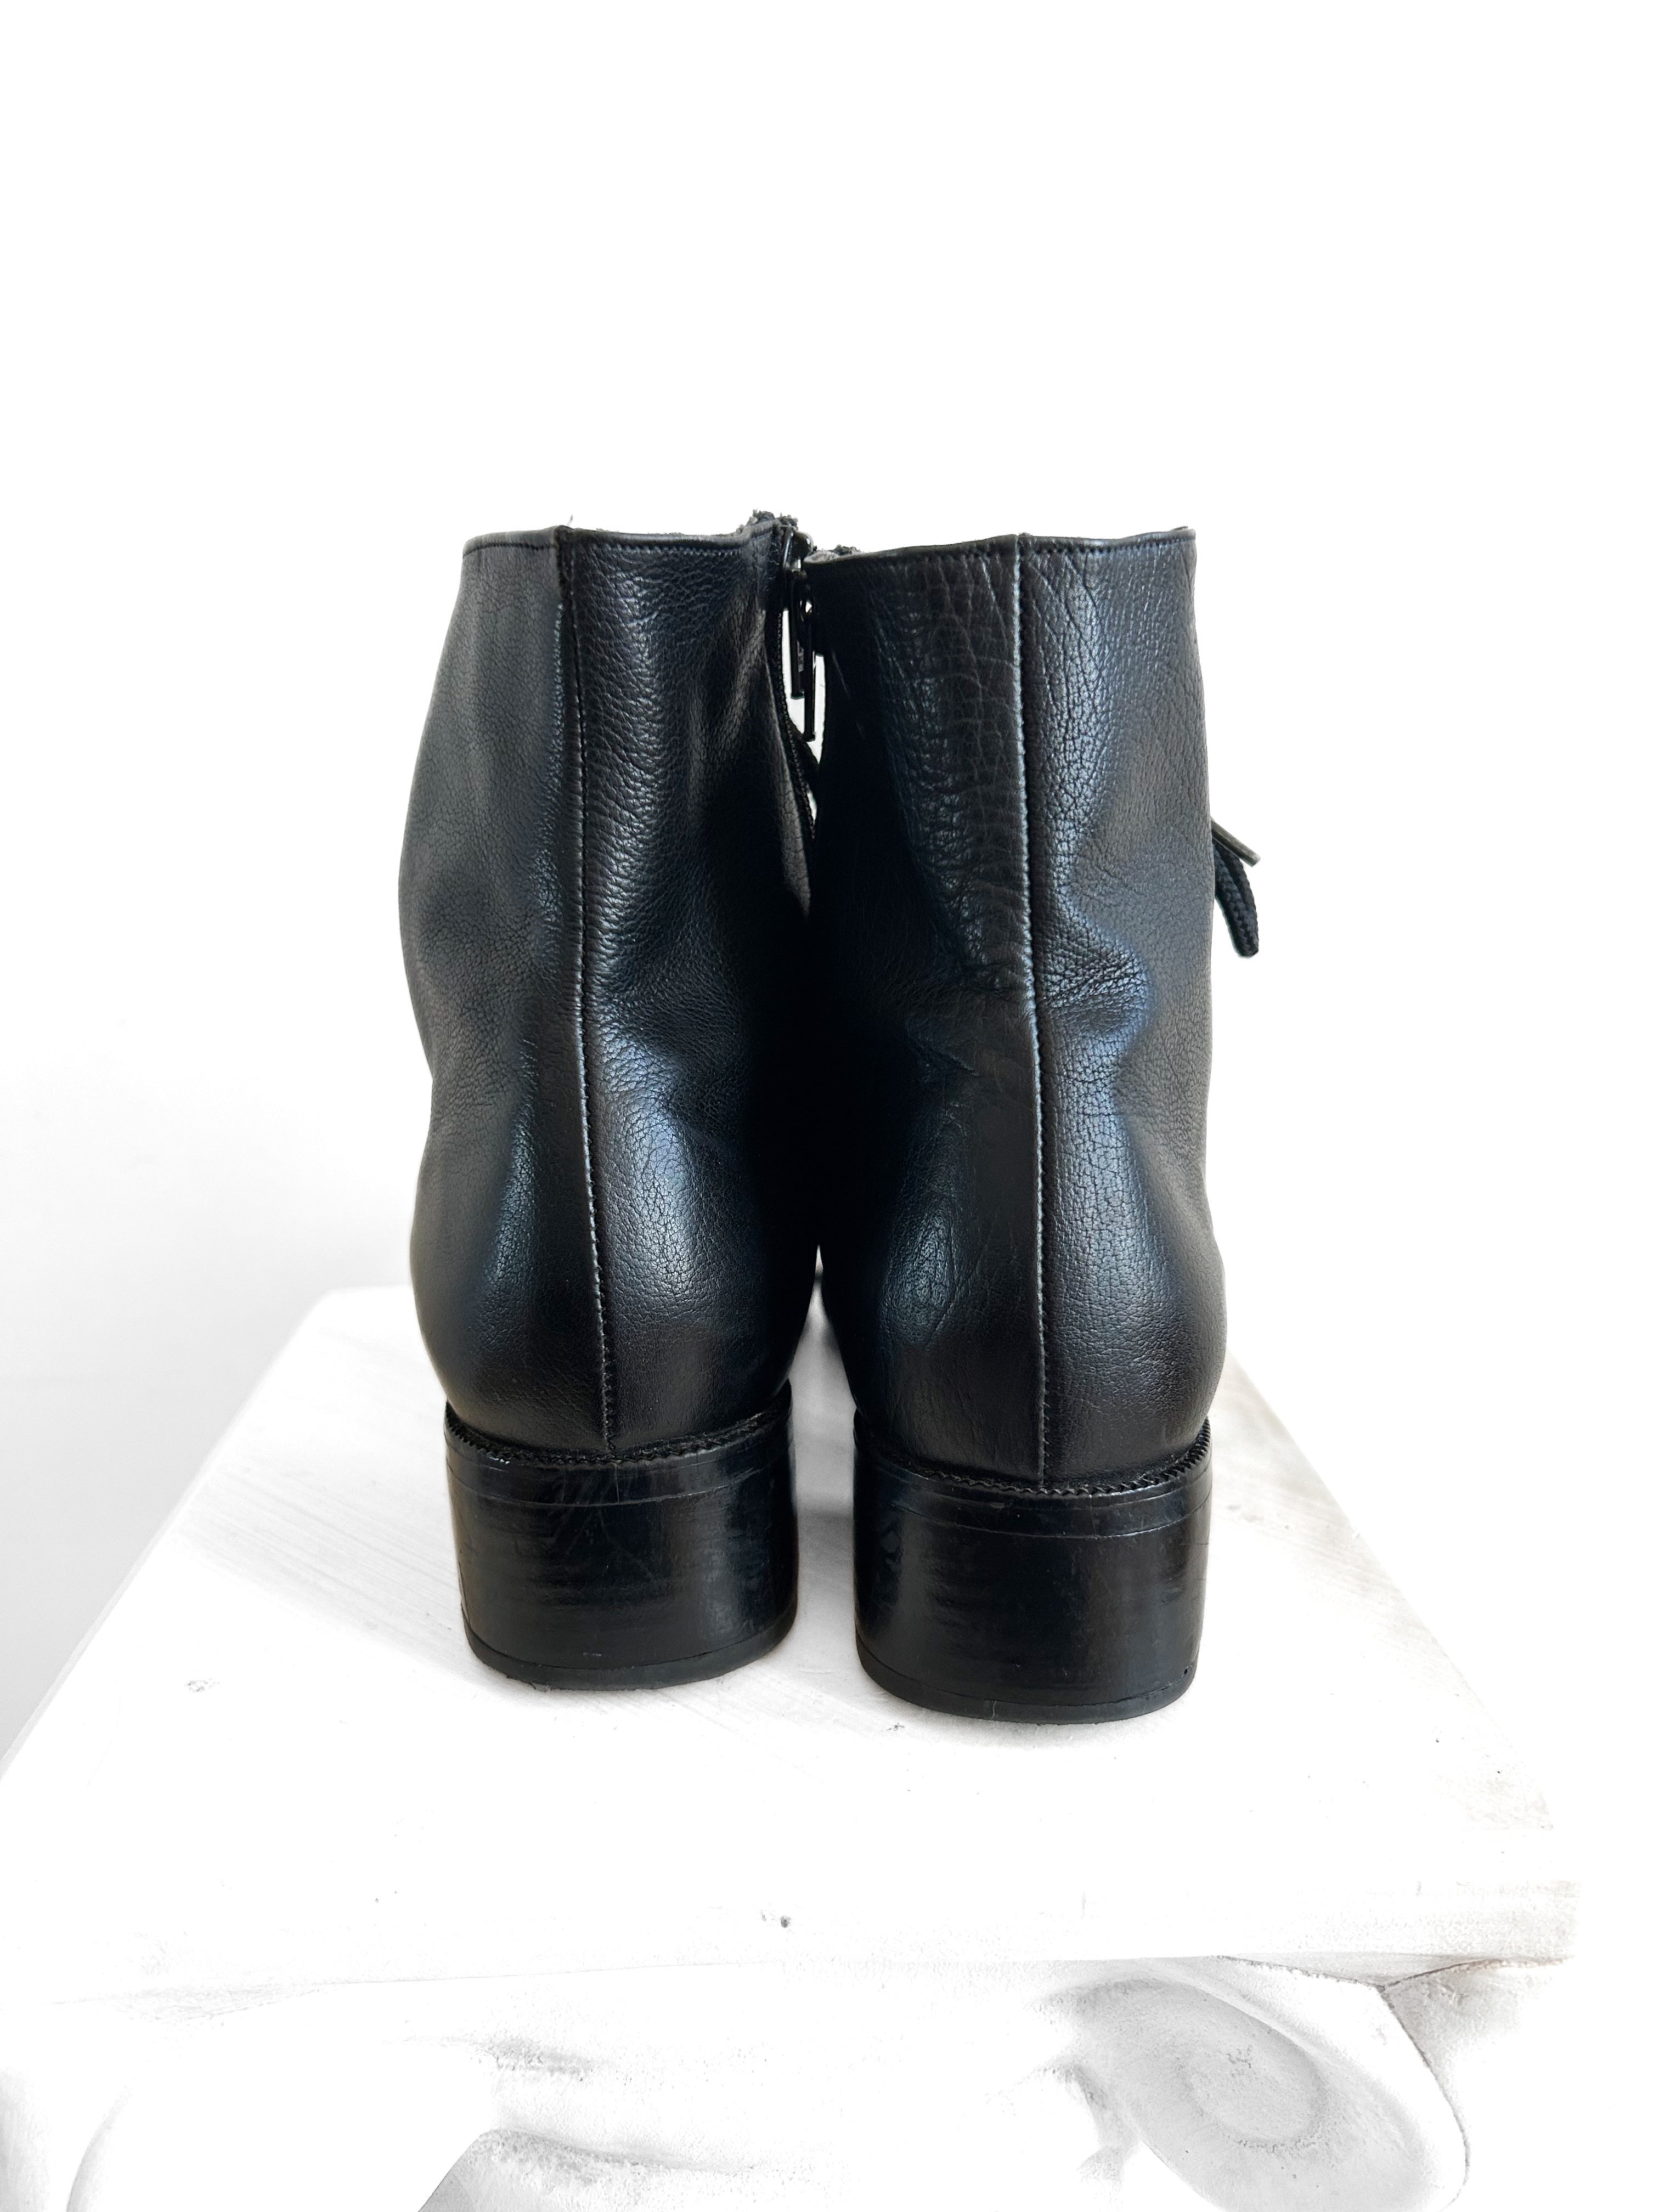 90s Black Leather Minimalist Ankle Boots Size 7 B,By Elli Bartoli, Made in Italy